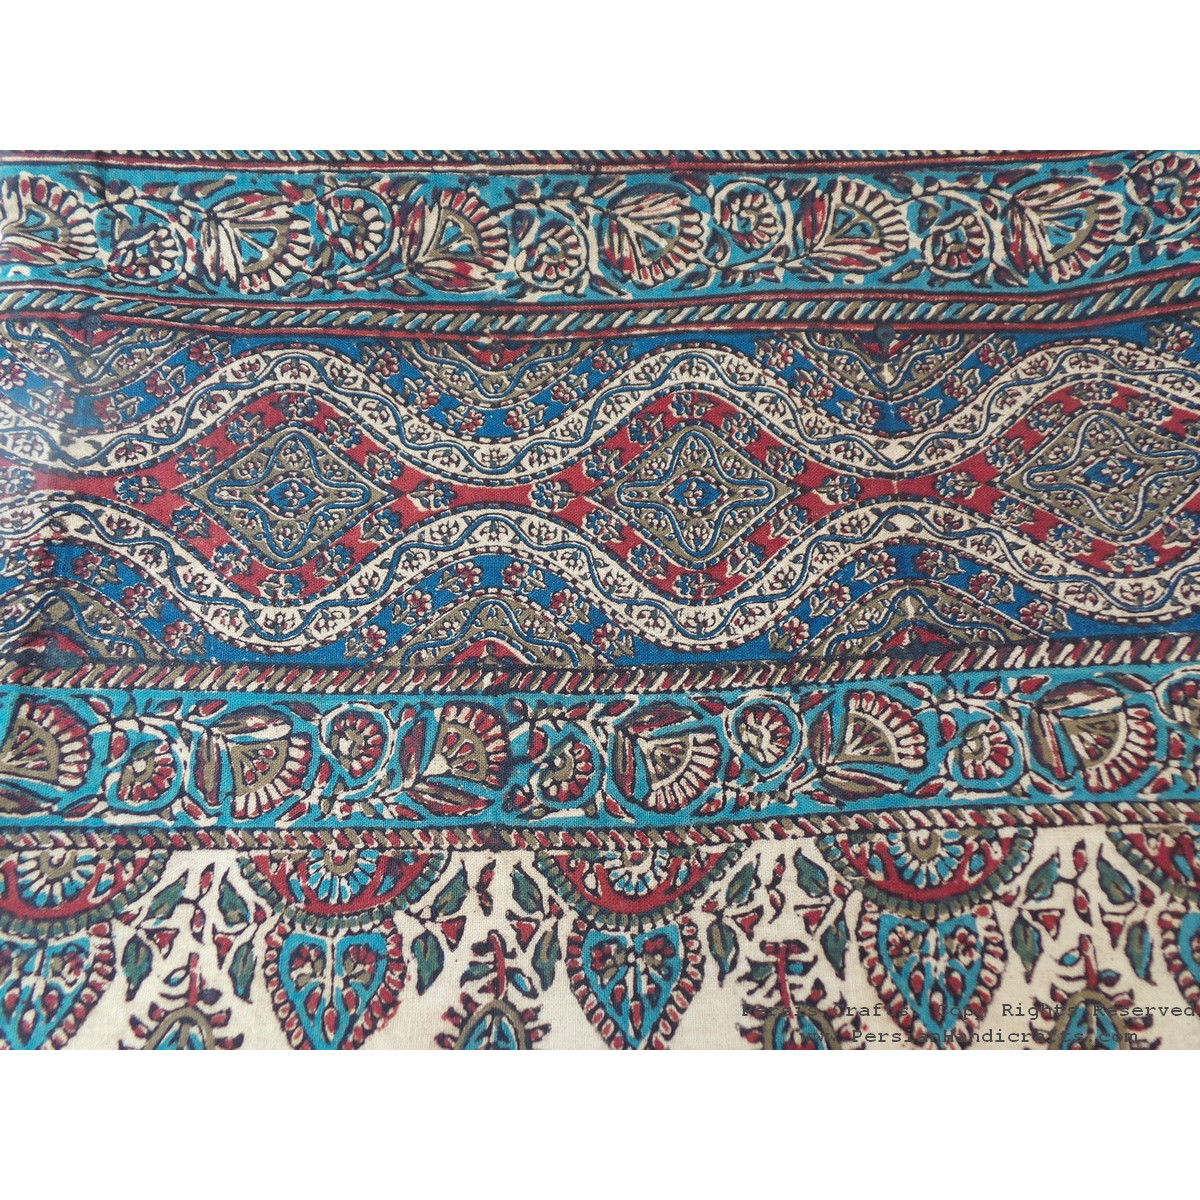 Persian Tapestry (Ghalamkar) Vintage Style Tablecloth - HGH3605-Persian Handicrafts